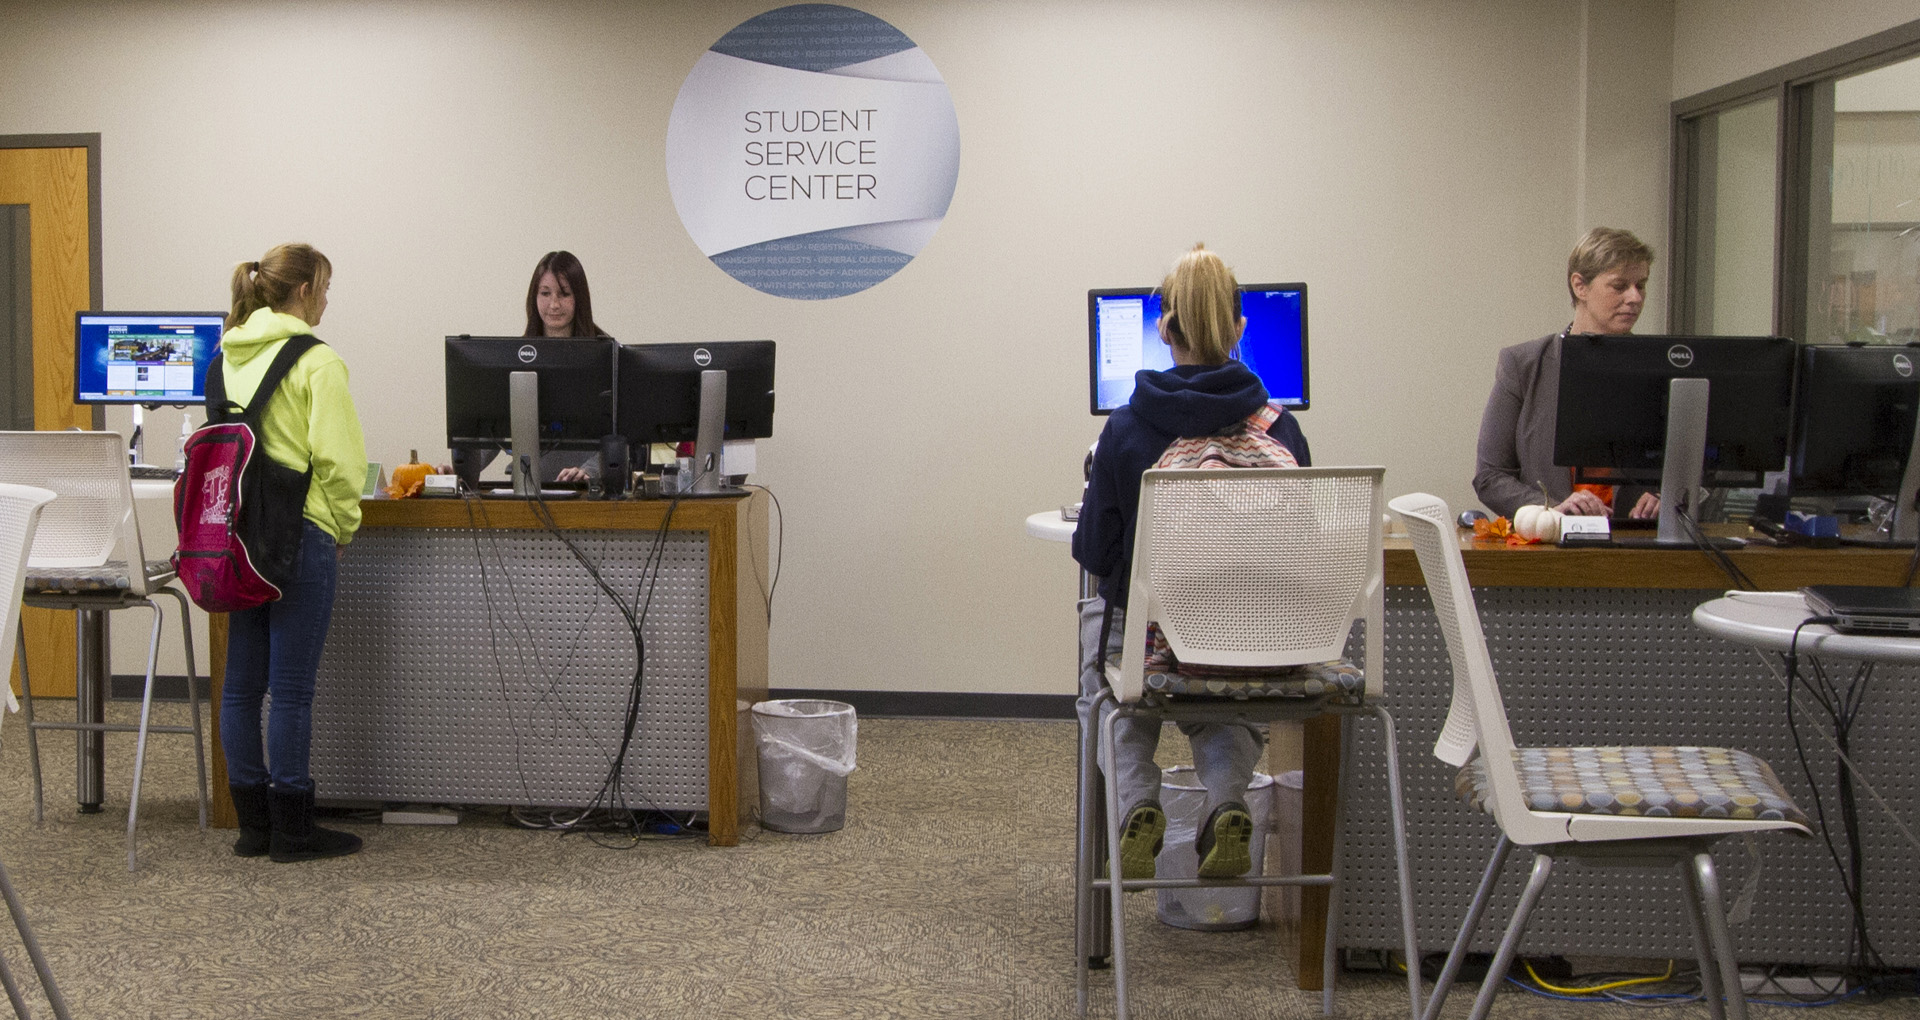 Students in the Niles Campus Student Service Center